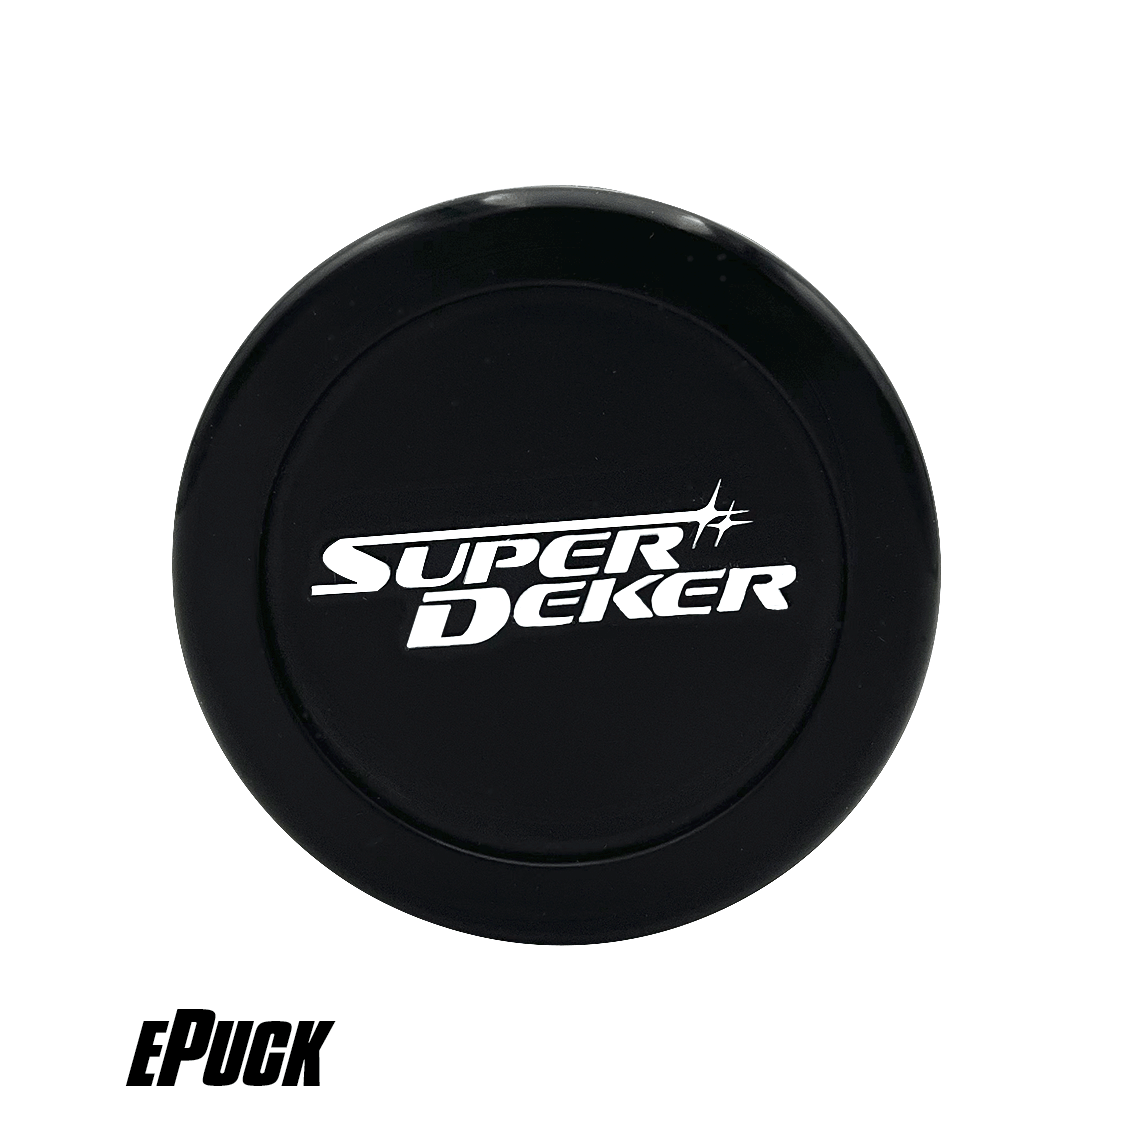 The SuperDekerPRO is the best of all Hockey Stickhandling Tools because it uses sports technology to give real-time data feedback to hockey players as they develop their training skills on and off the ice.